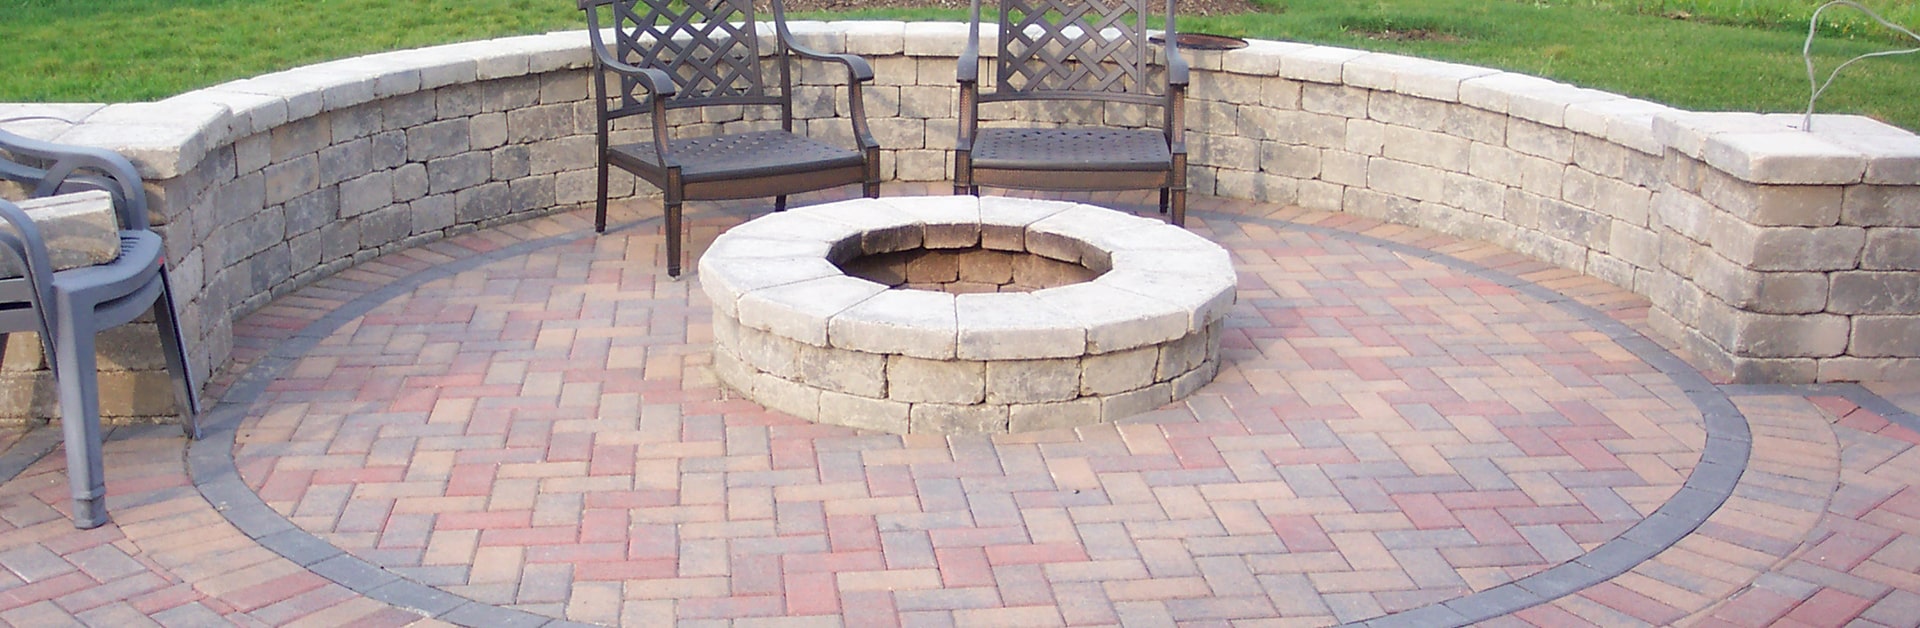 Fire Pits Fireplaces, Outdoor Fire Pits San Diego